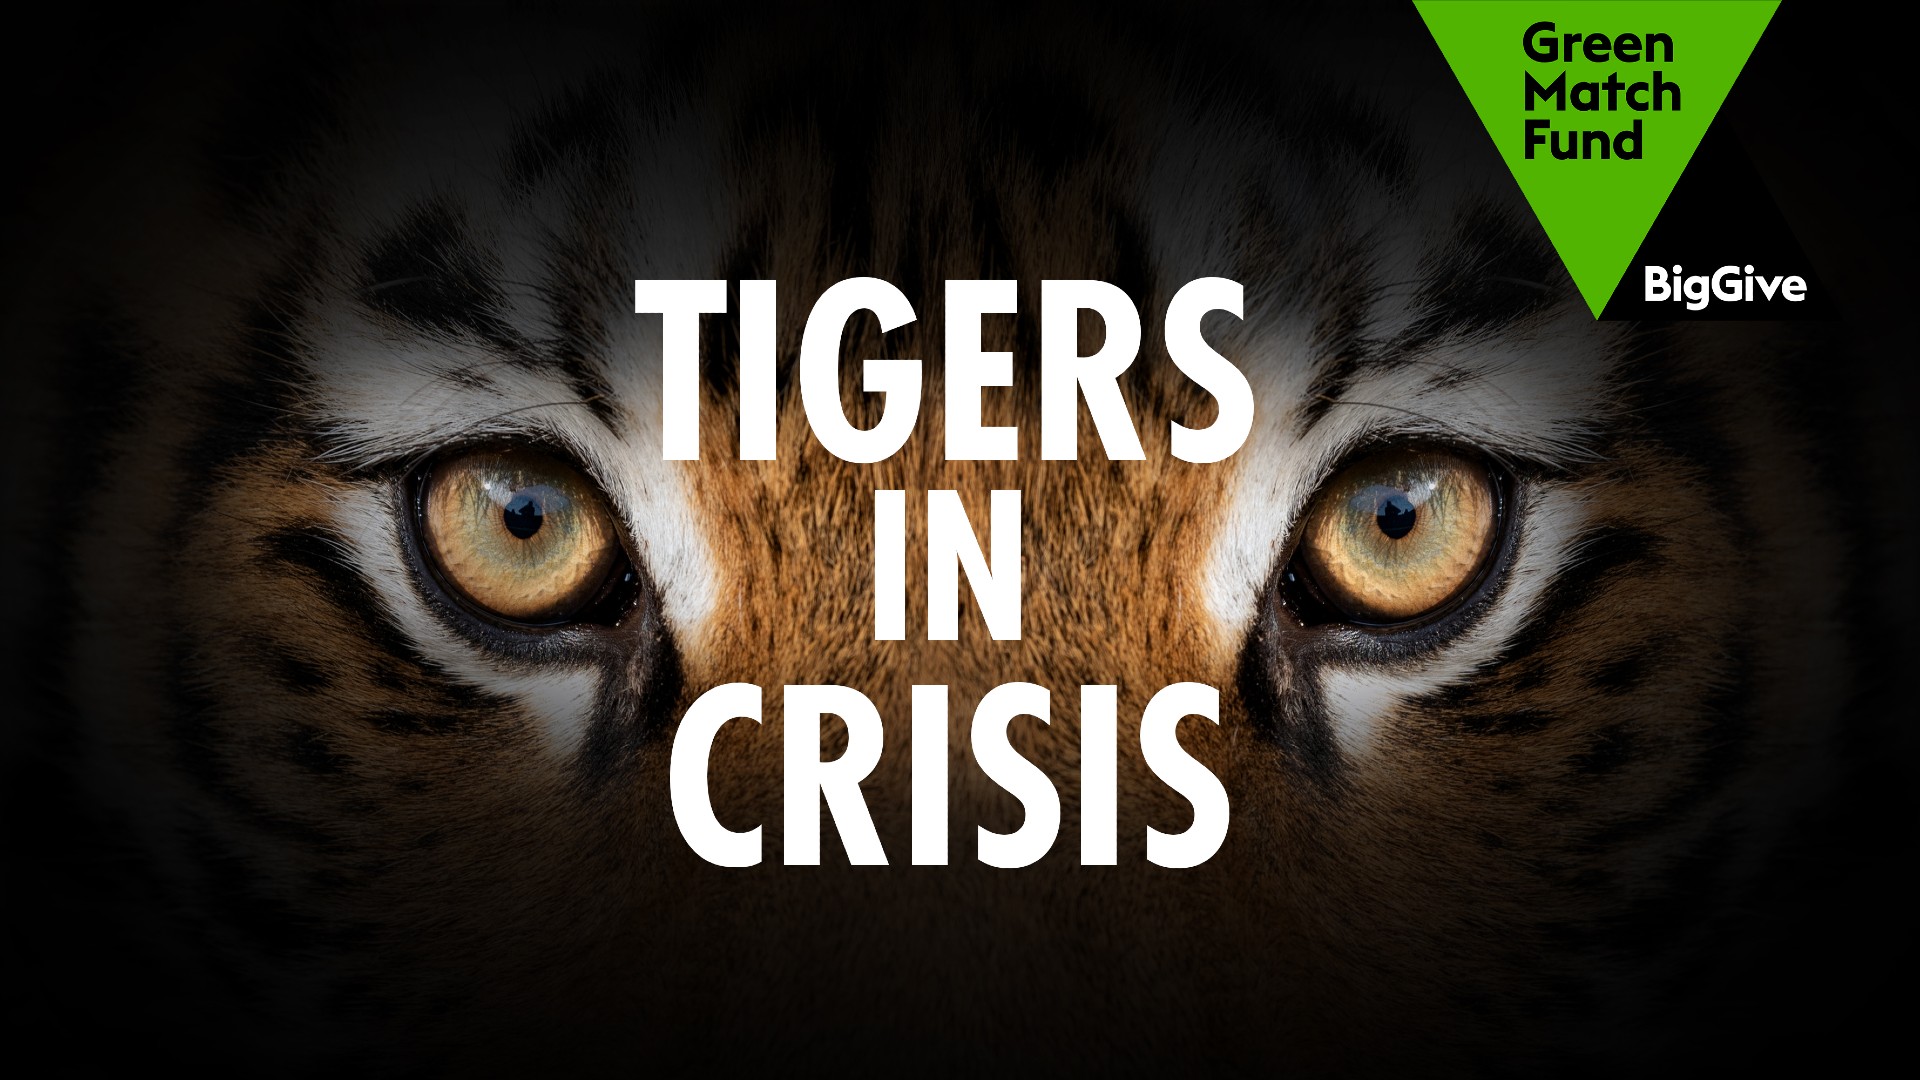 A black banner with a close-up of tiger's eyes and the text 'Tigers in Crisis' overlaid